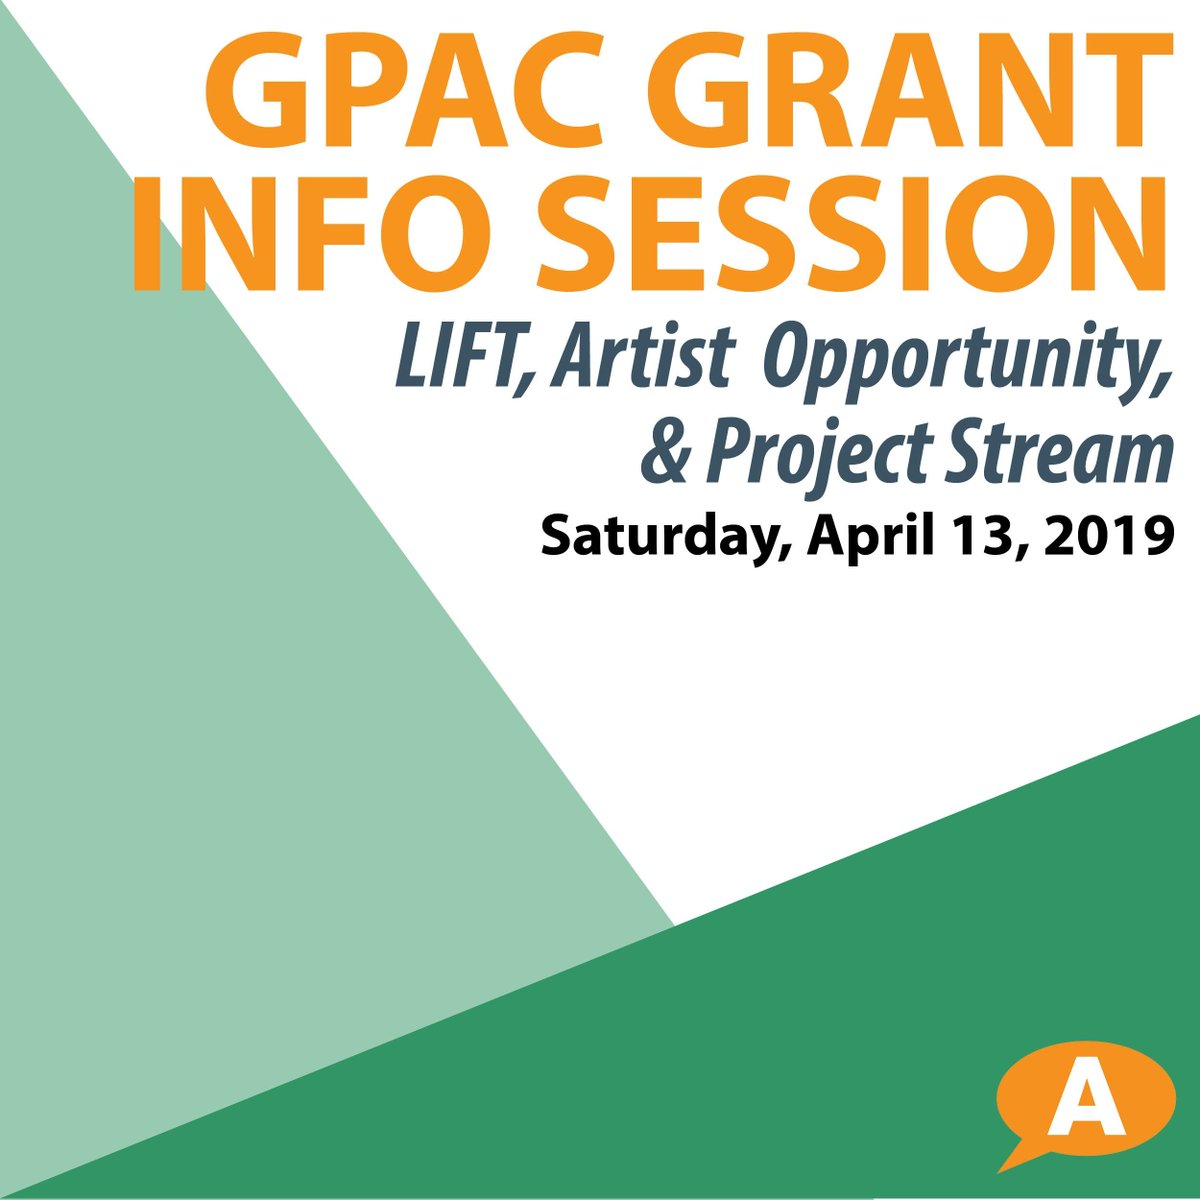 This Saturday, April 13, at Touchstone Center for Crafts in Farmington, learn about our grant programs, upcoming application deadlines, and ask questions about your application. buff.ly/2U70Drr @touchstonecraft